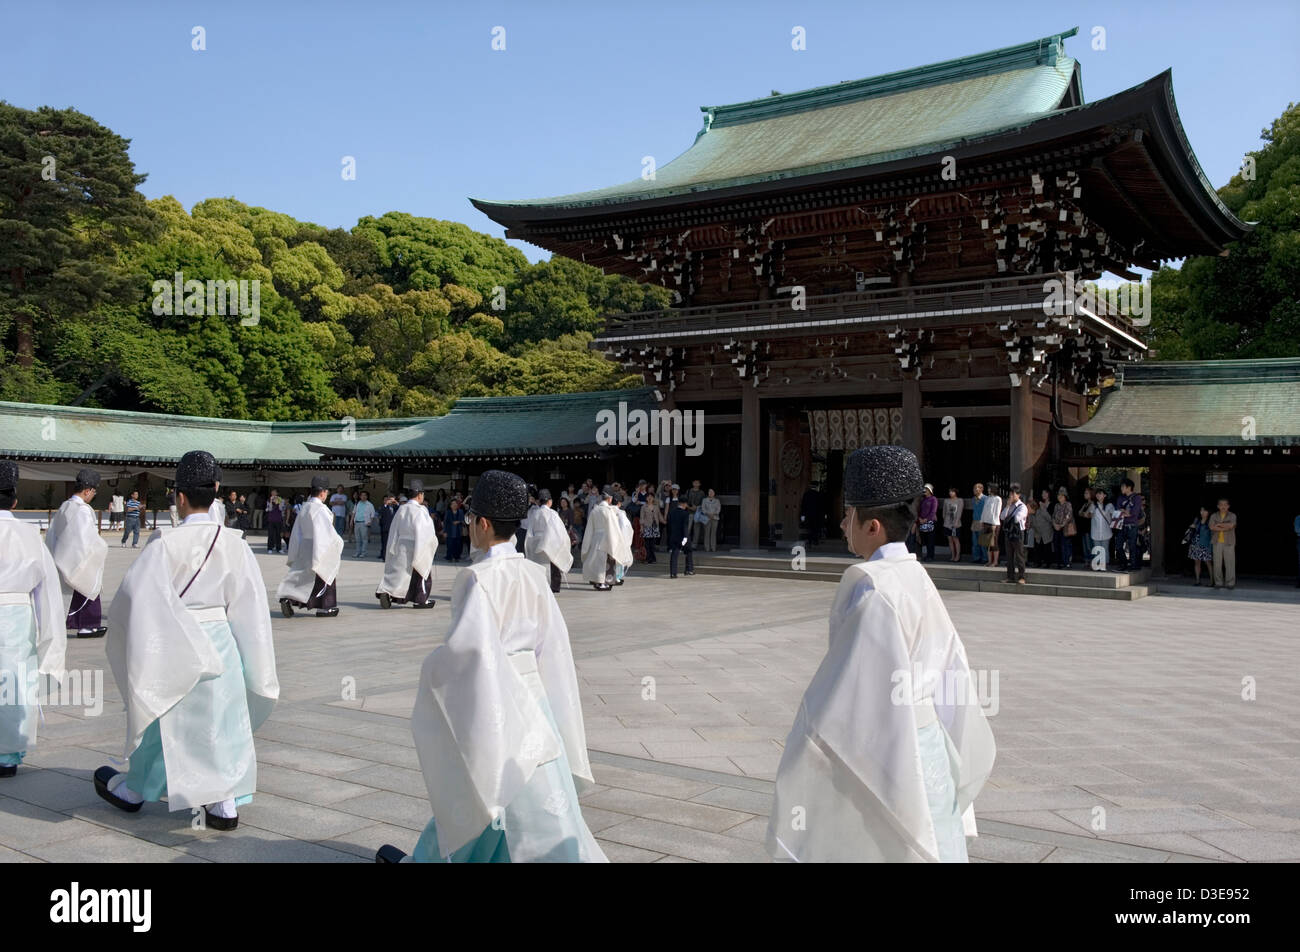 Shinto priests march in a procession through main gate of Meiji Jingu shrine during a religious ceremony in Tokyo, Japan. Stock Photo